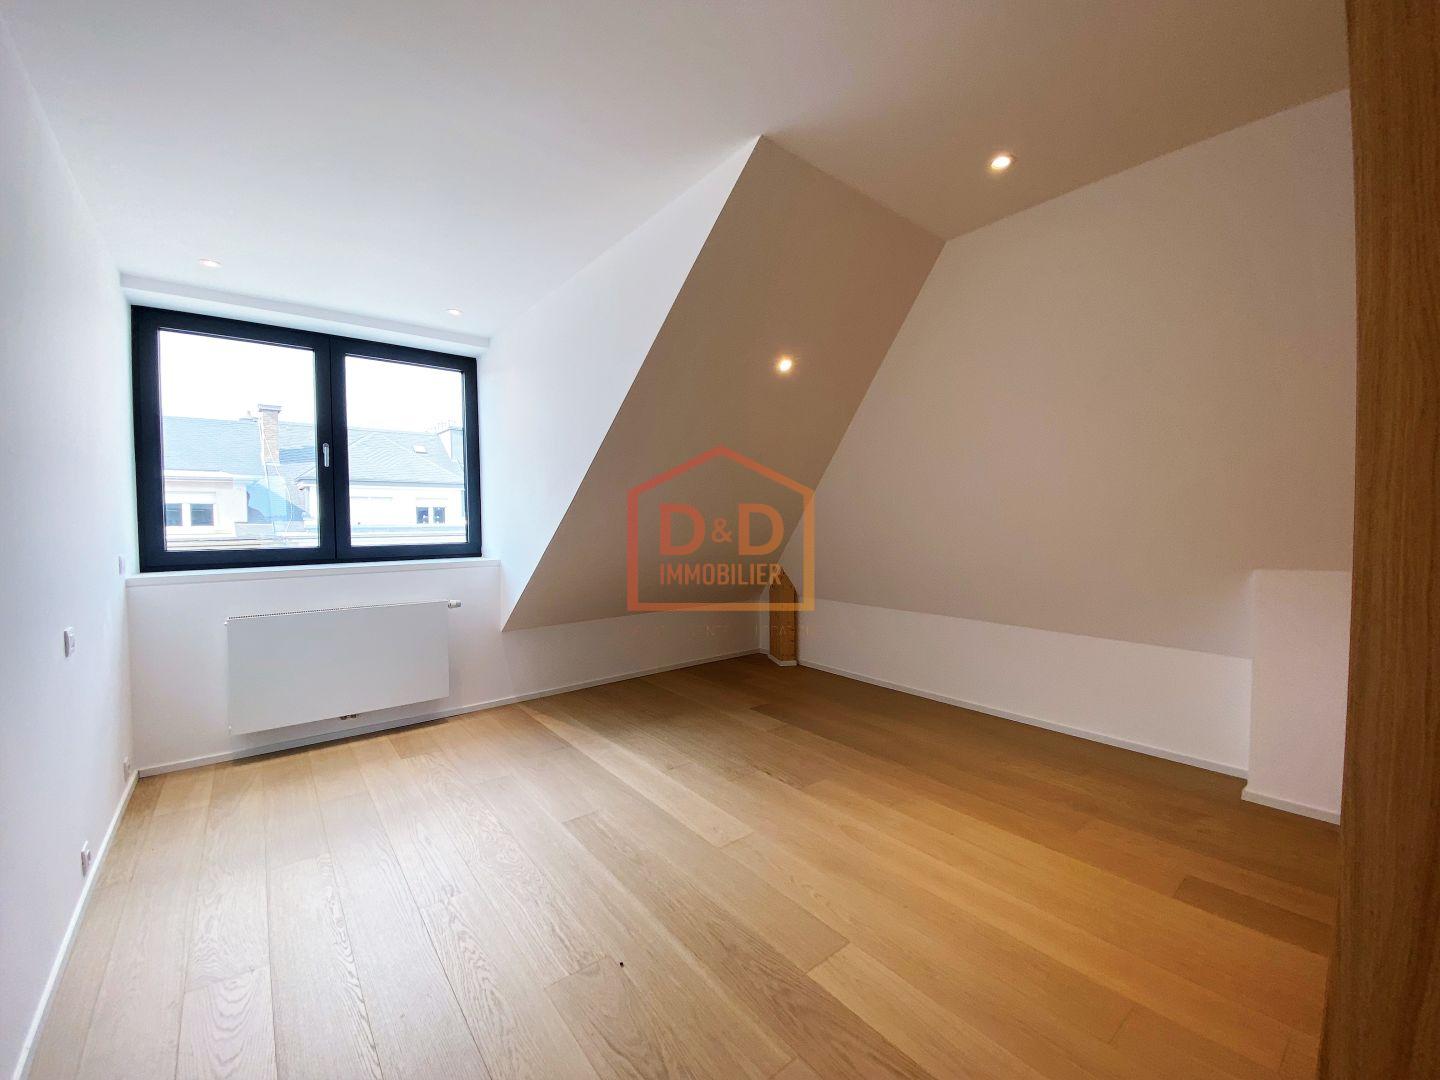 Appartement à Luxembourg-Belair, 78 m², 2 chambres, 2 500 €/mois